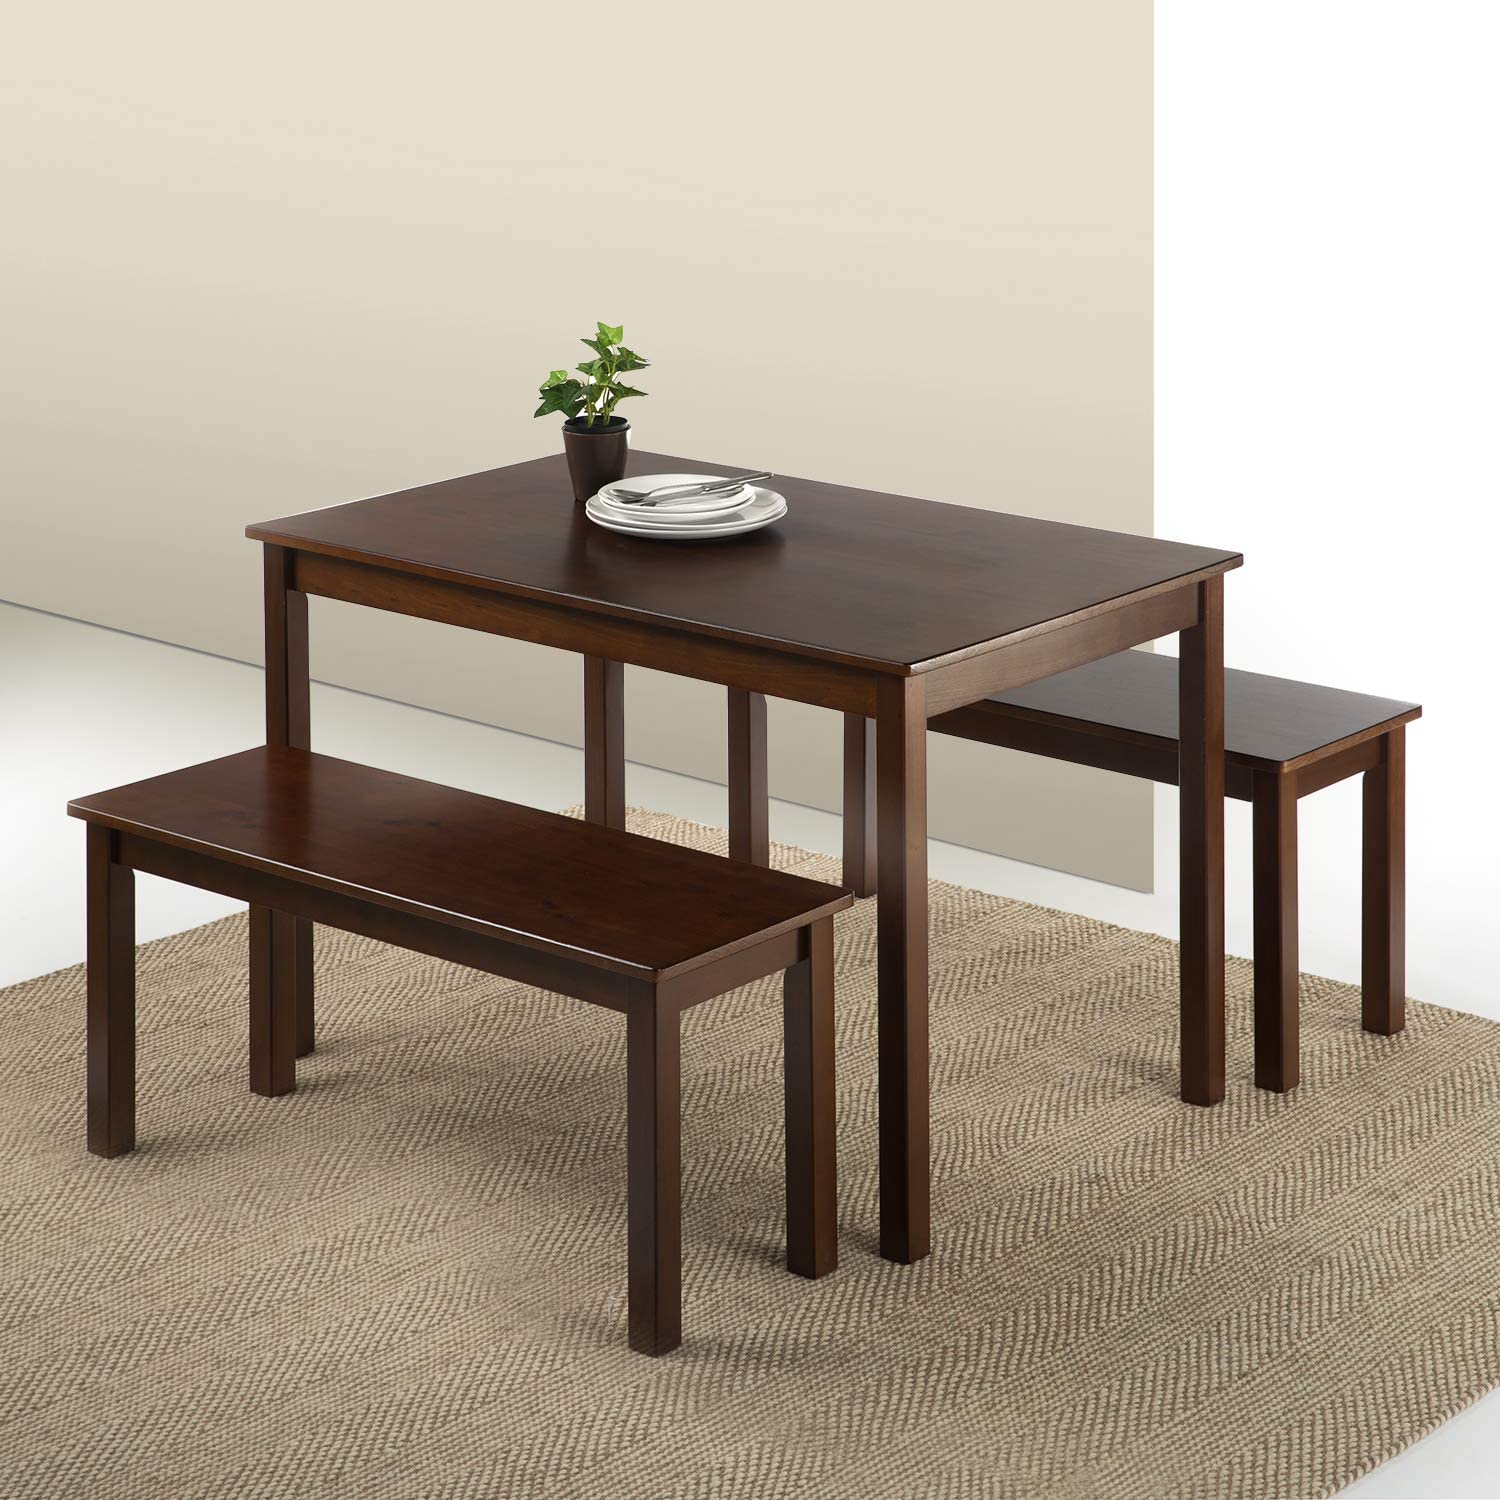 Zinus Juliet Espresso Wood Dining Table with Two Benches / 3 Piece Set